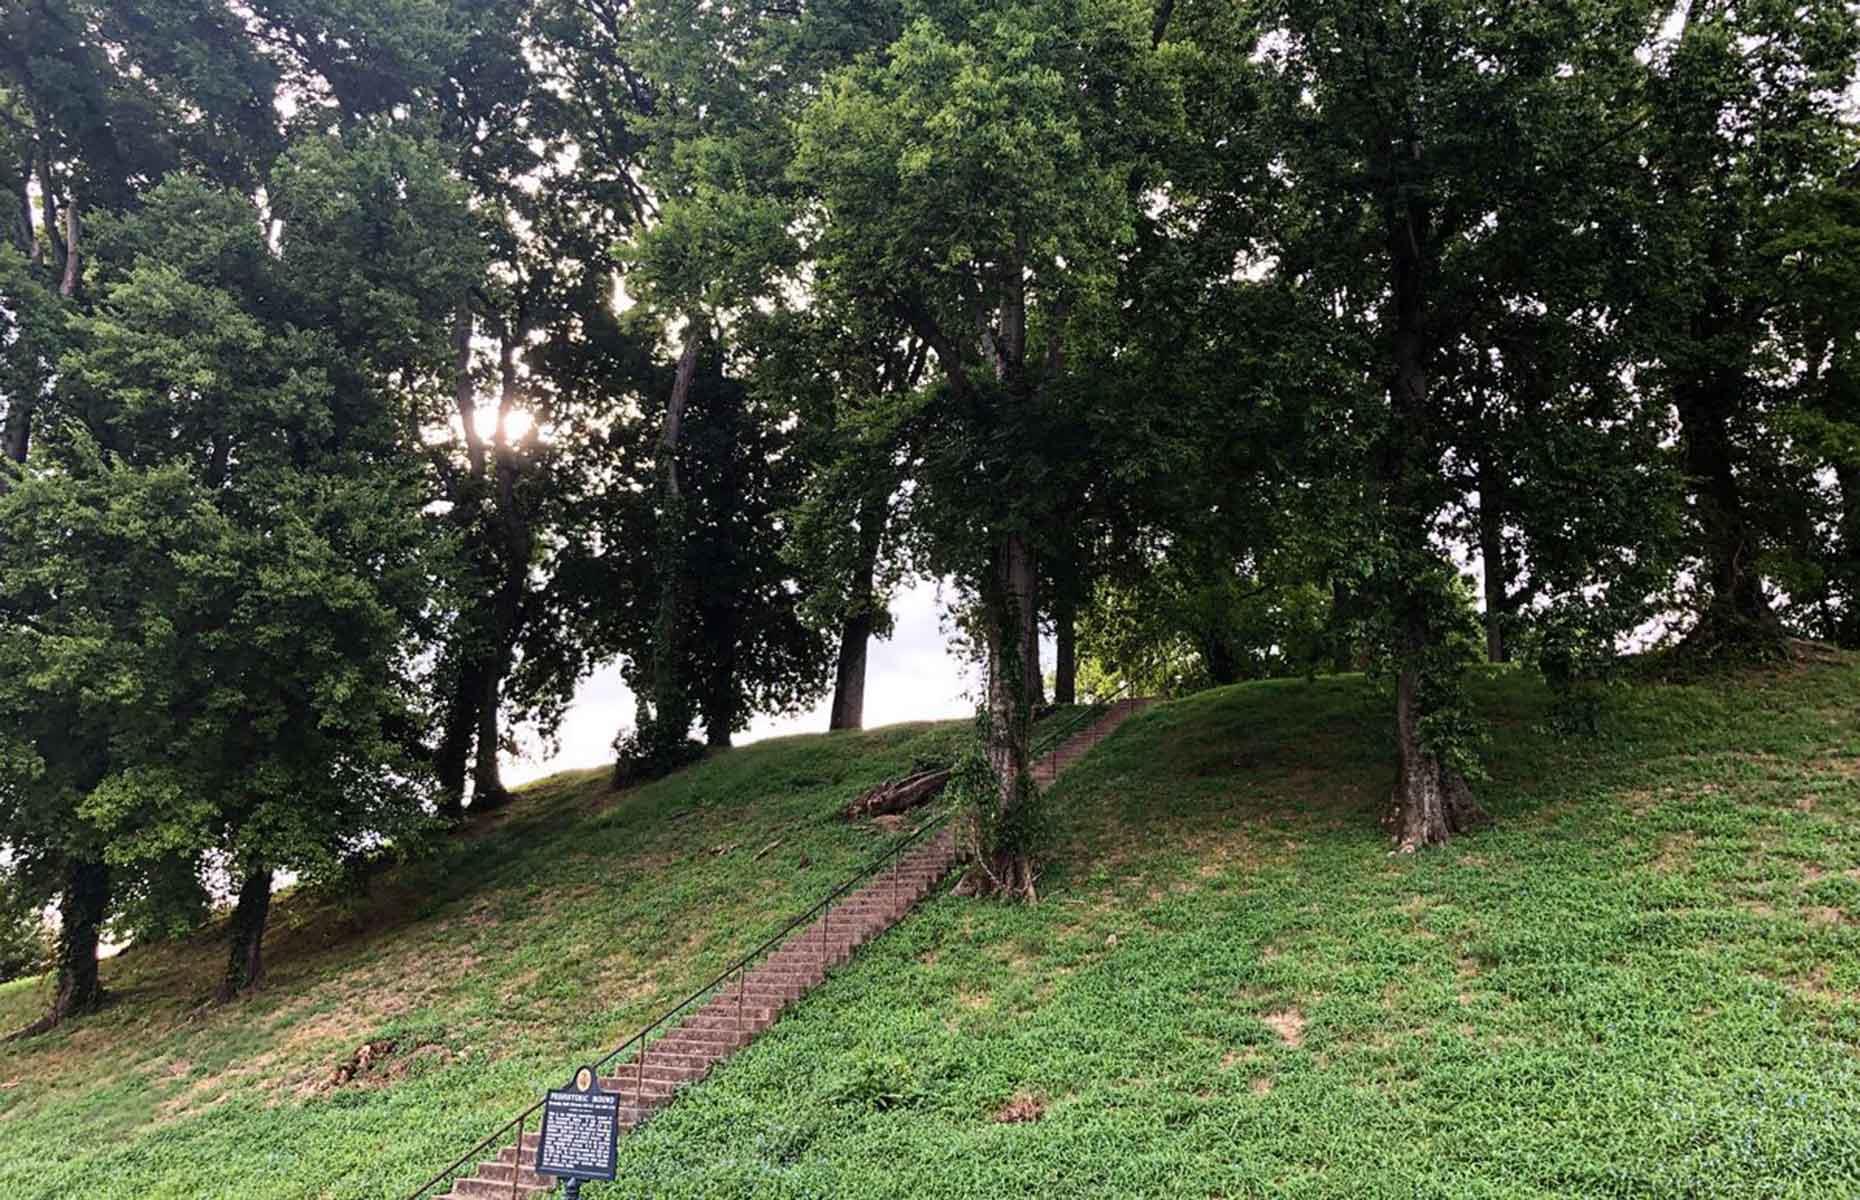 <p>In the northwestern corner of Alabama lies the <a href="https://www.florencealmuseums.com/landing-page/indianmoundmuseum">Florence Indian Mound</a>, an ancient man-made structure built between <a href="https://www.nps.gov/fosm/learn/historyculture/woodlandperiod.htm">AD 100 and 500</a>. A sign at the base of the steps explains that the grassy landmark was probably used as a base for ceremonial temples or chief’s houses, and was encircled by an earthen wall. You can climb the steps to the top to take in the ancient wonder; it’s thought smaller mounds, villages and cultivated fields once lay nearby.</p>  <p><strong><a href="http://bit.ly/3roL4wv">Love this? Follow our Facebook page for more travel inspiration</a></strong></p>